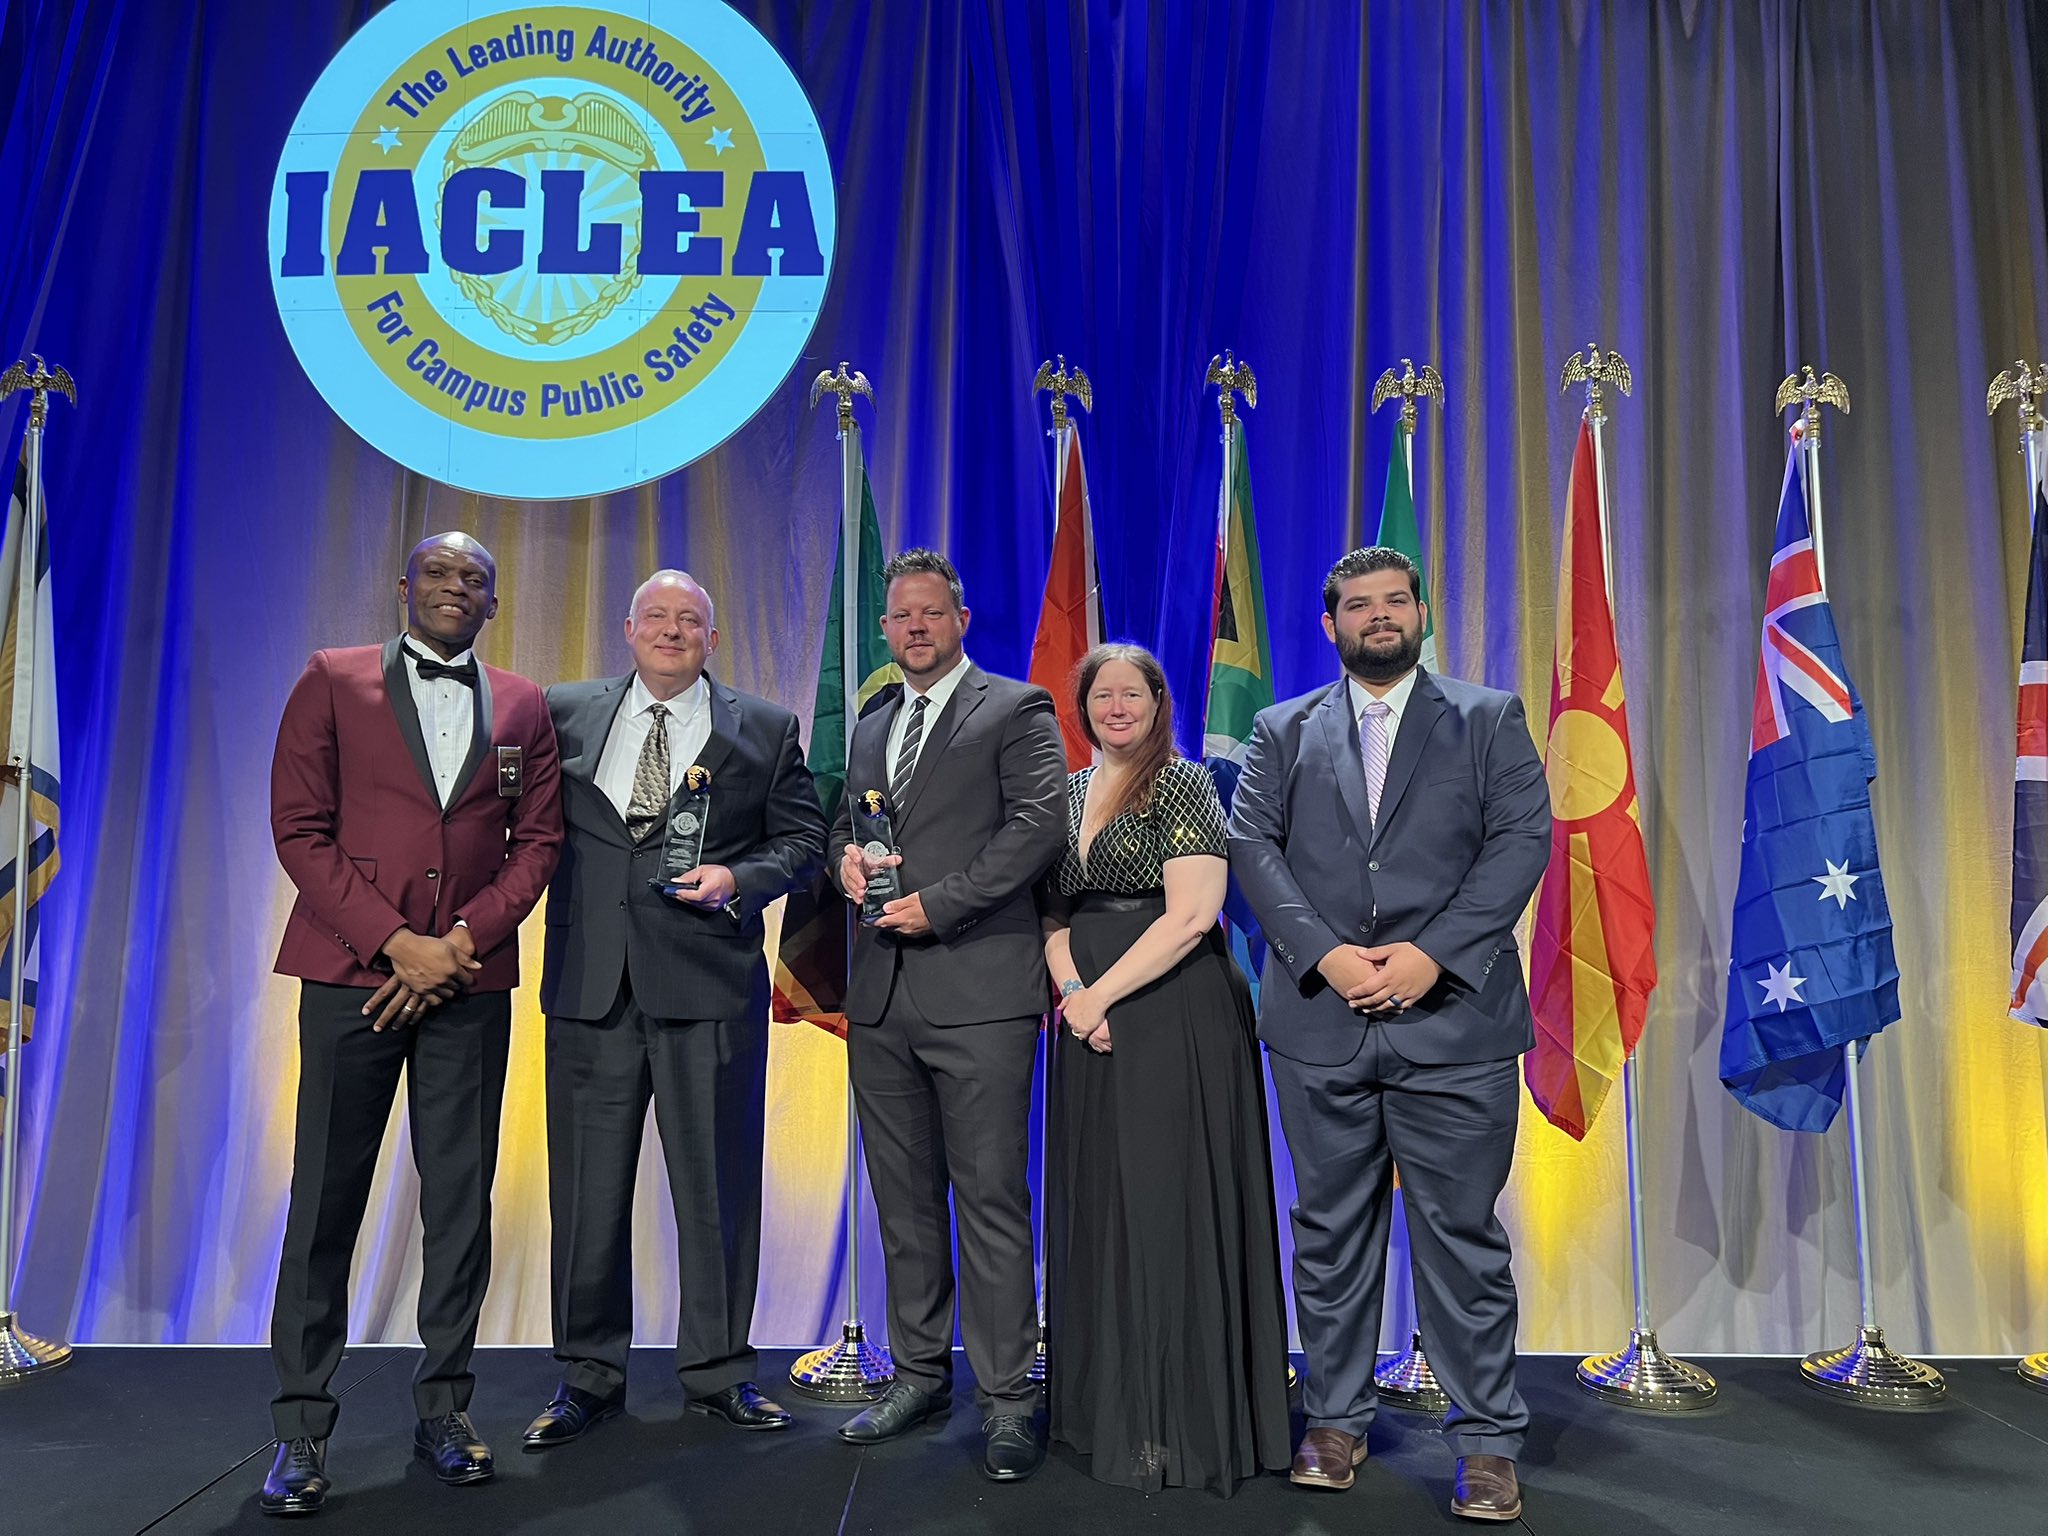 In the photo, from left to right are: Chief John Ojeisekhoba (President of IACLEA) and UTMB Chief Ken Adcox, Sgt. Kristopher McGill, Dispatcher Alana Dickey, and Officer Travis Gonzalez.